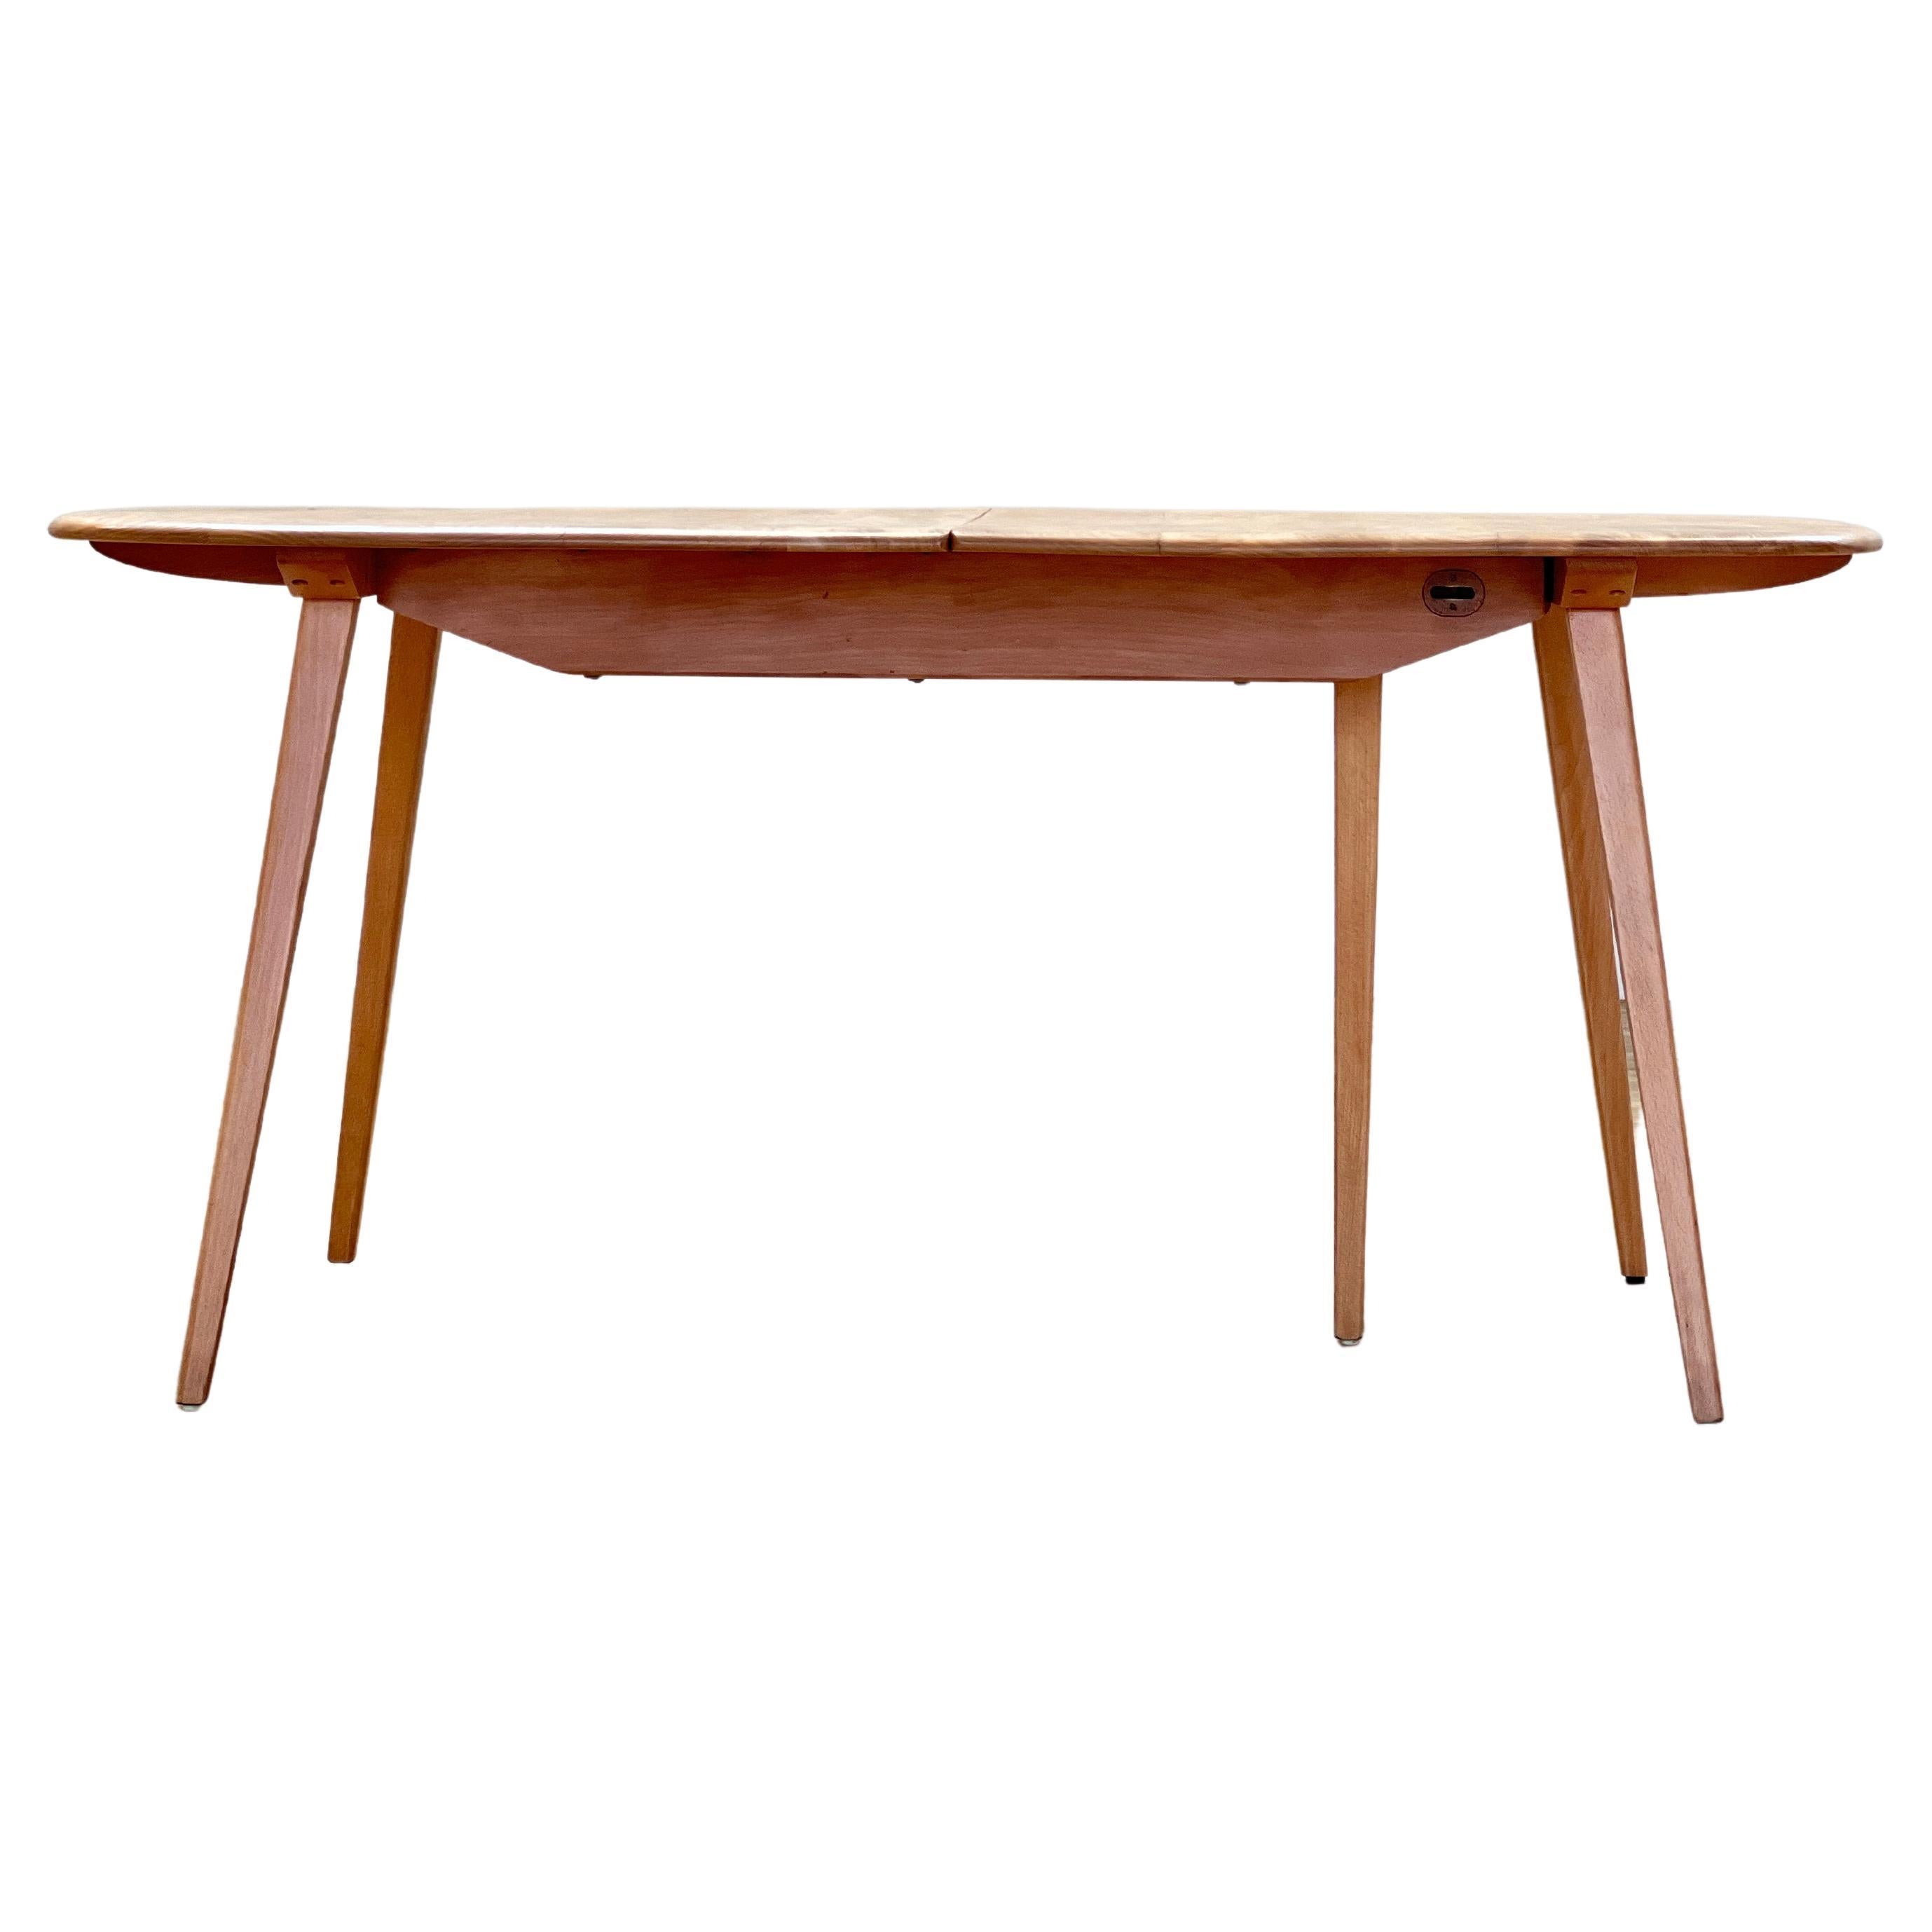 Lucian Ercolani Dining Room Tables